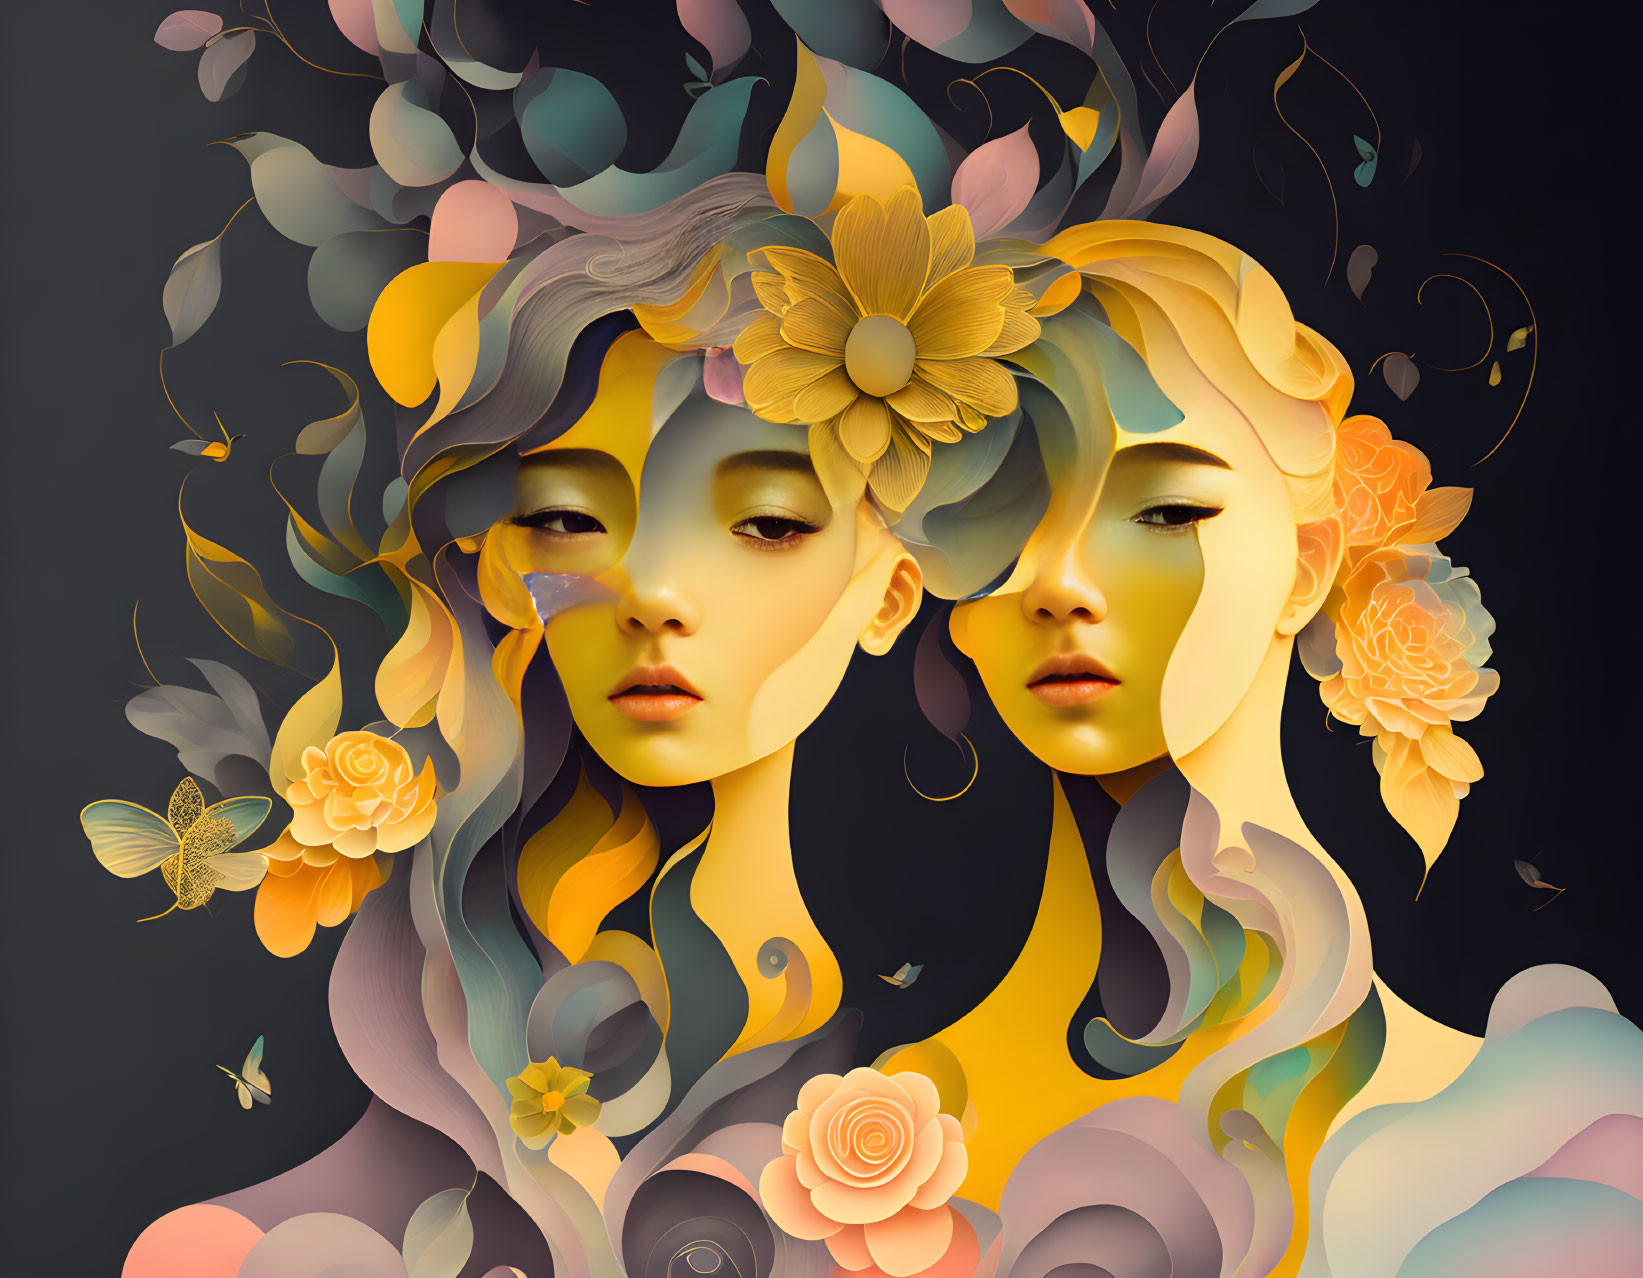 Mirrored faces with floral hair and butterflies in colorful style